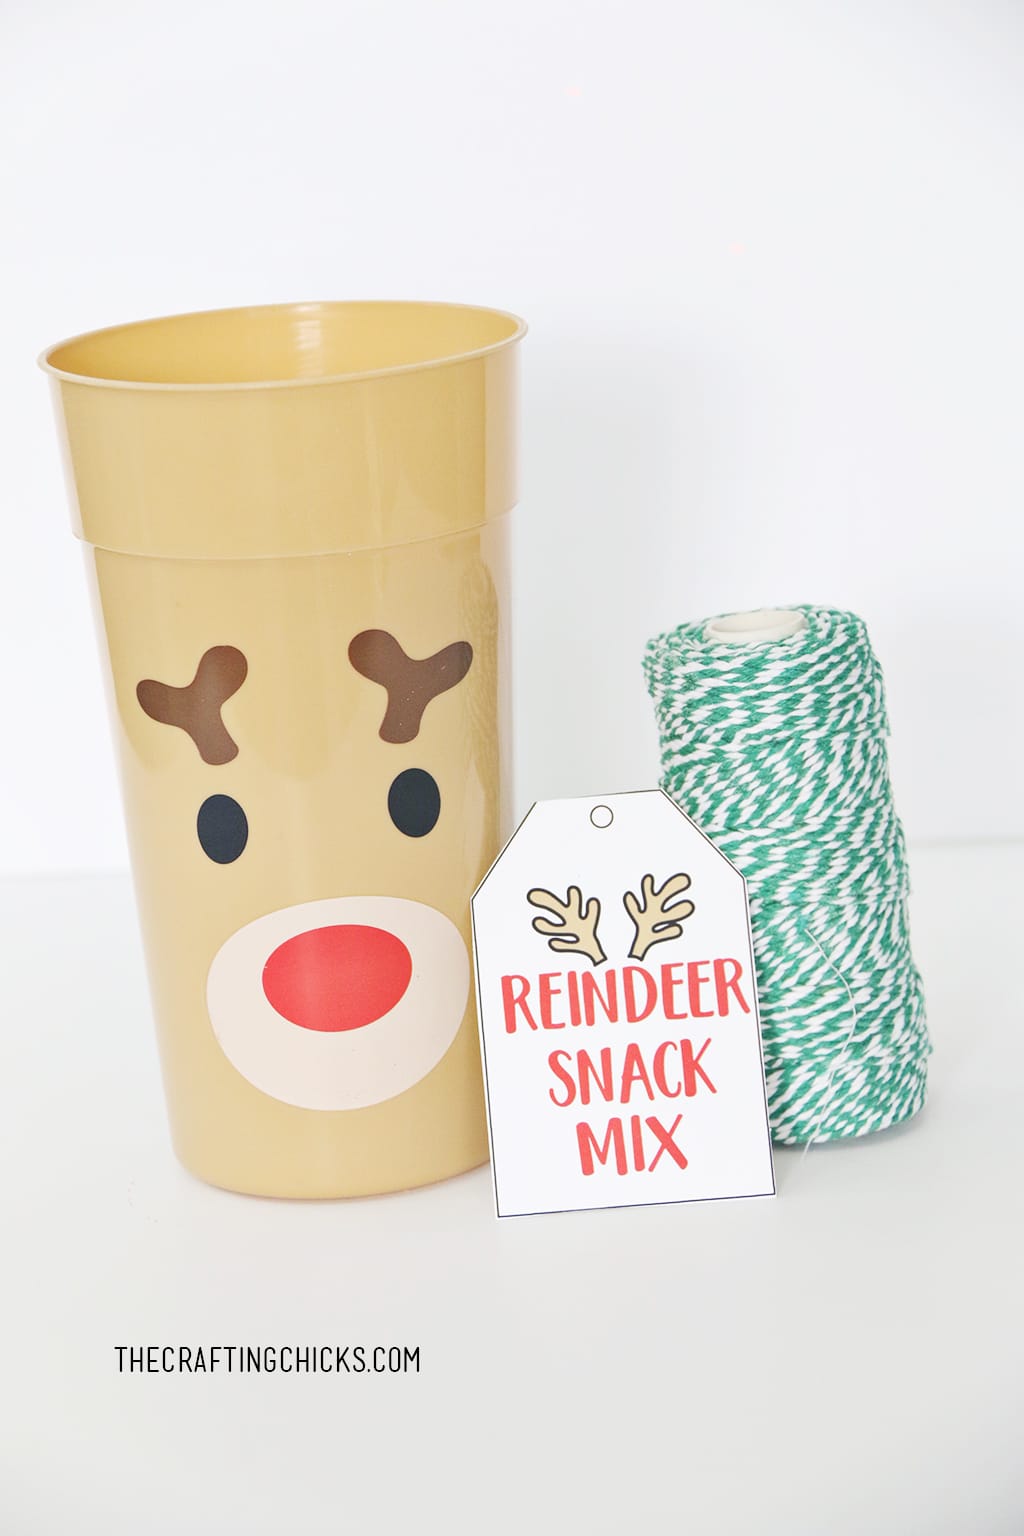 Reindeer tumbler cup with gift tag and green bakers twine.